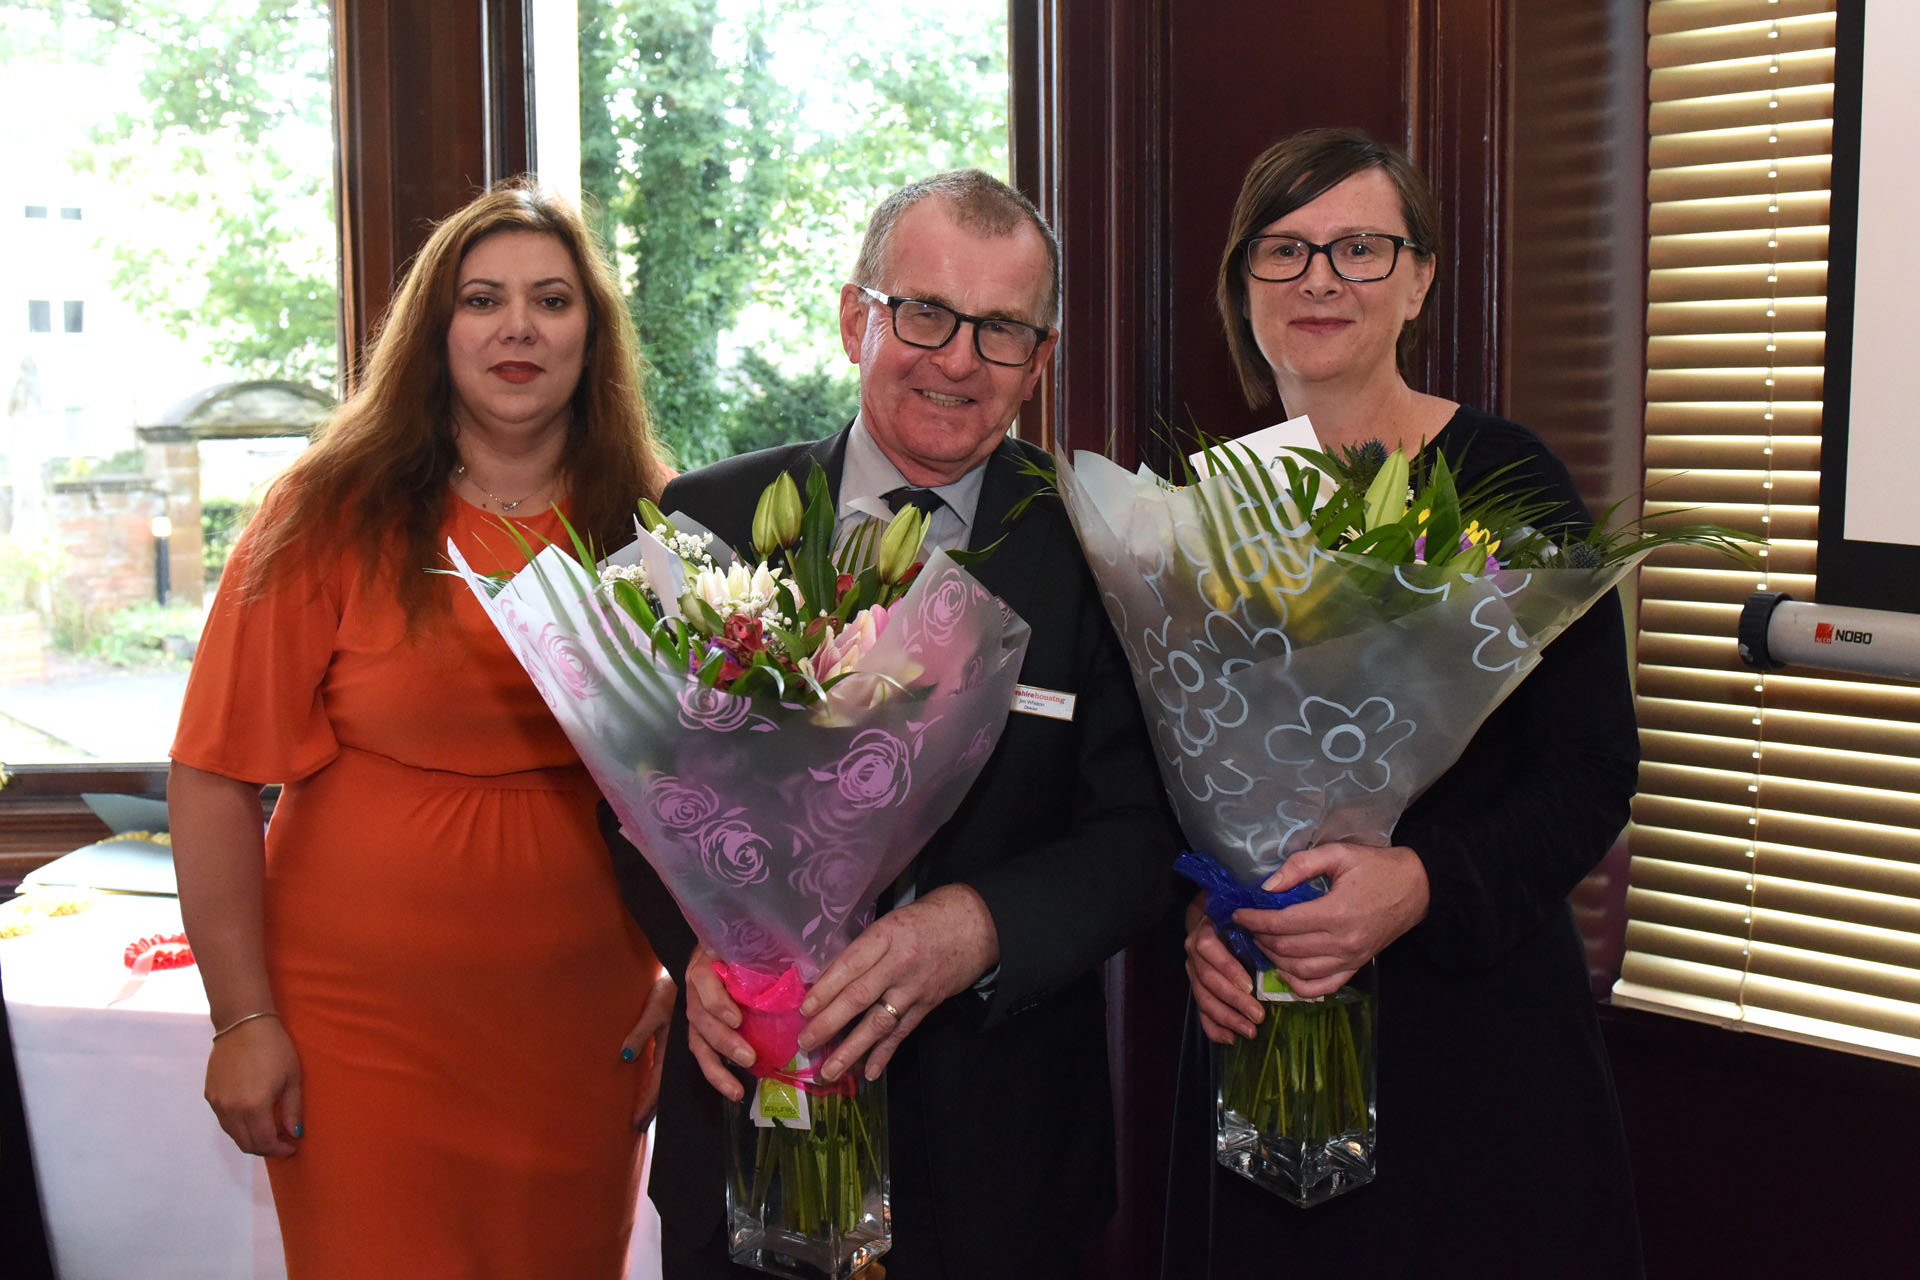 Rhonda Leith to retire as Ayrshire Housing chair after five successful years